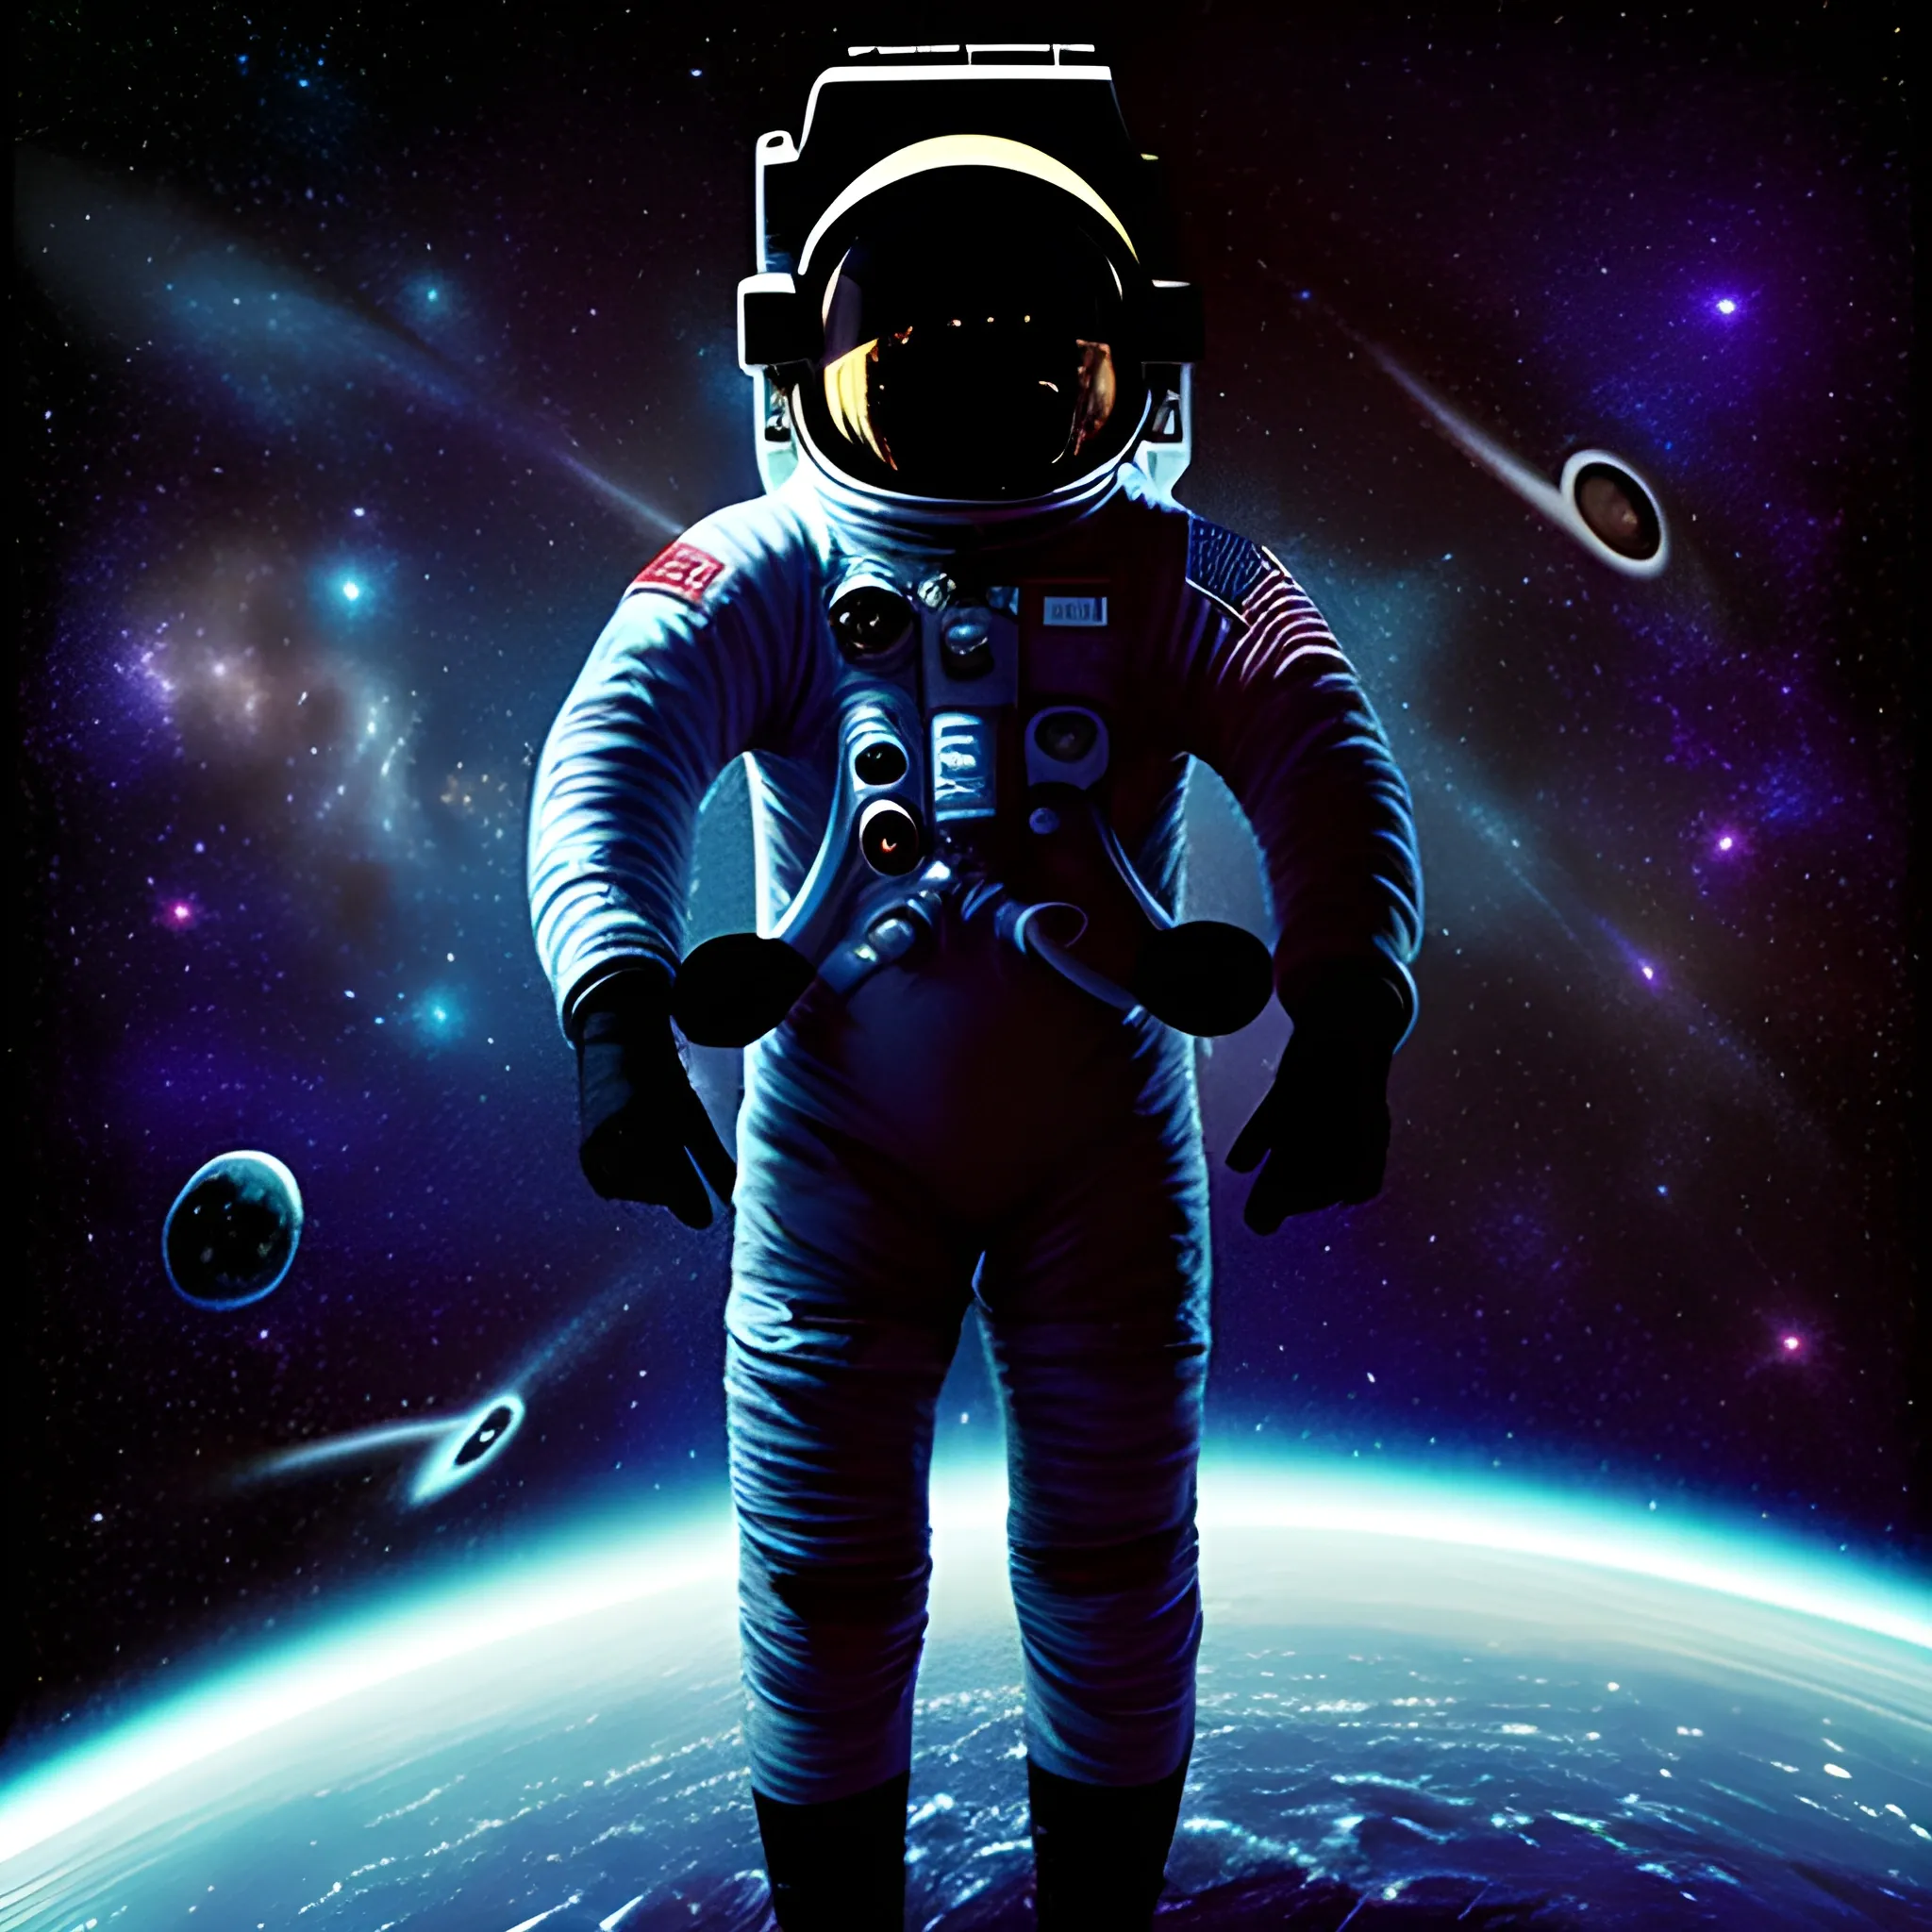 astronaut with astro suit totally black, tripping in void with a fully star space void